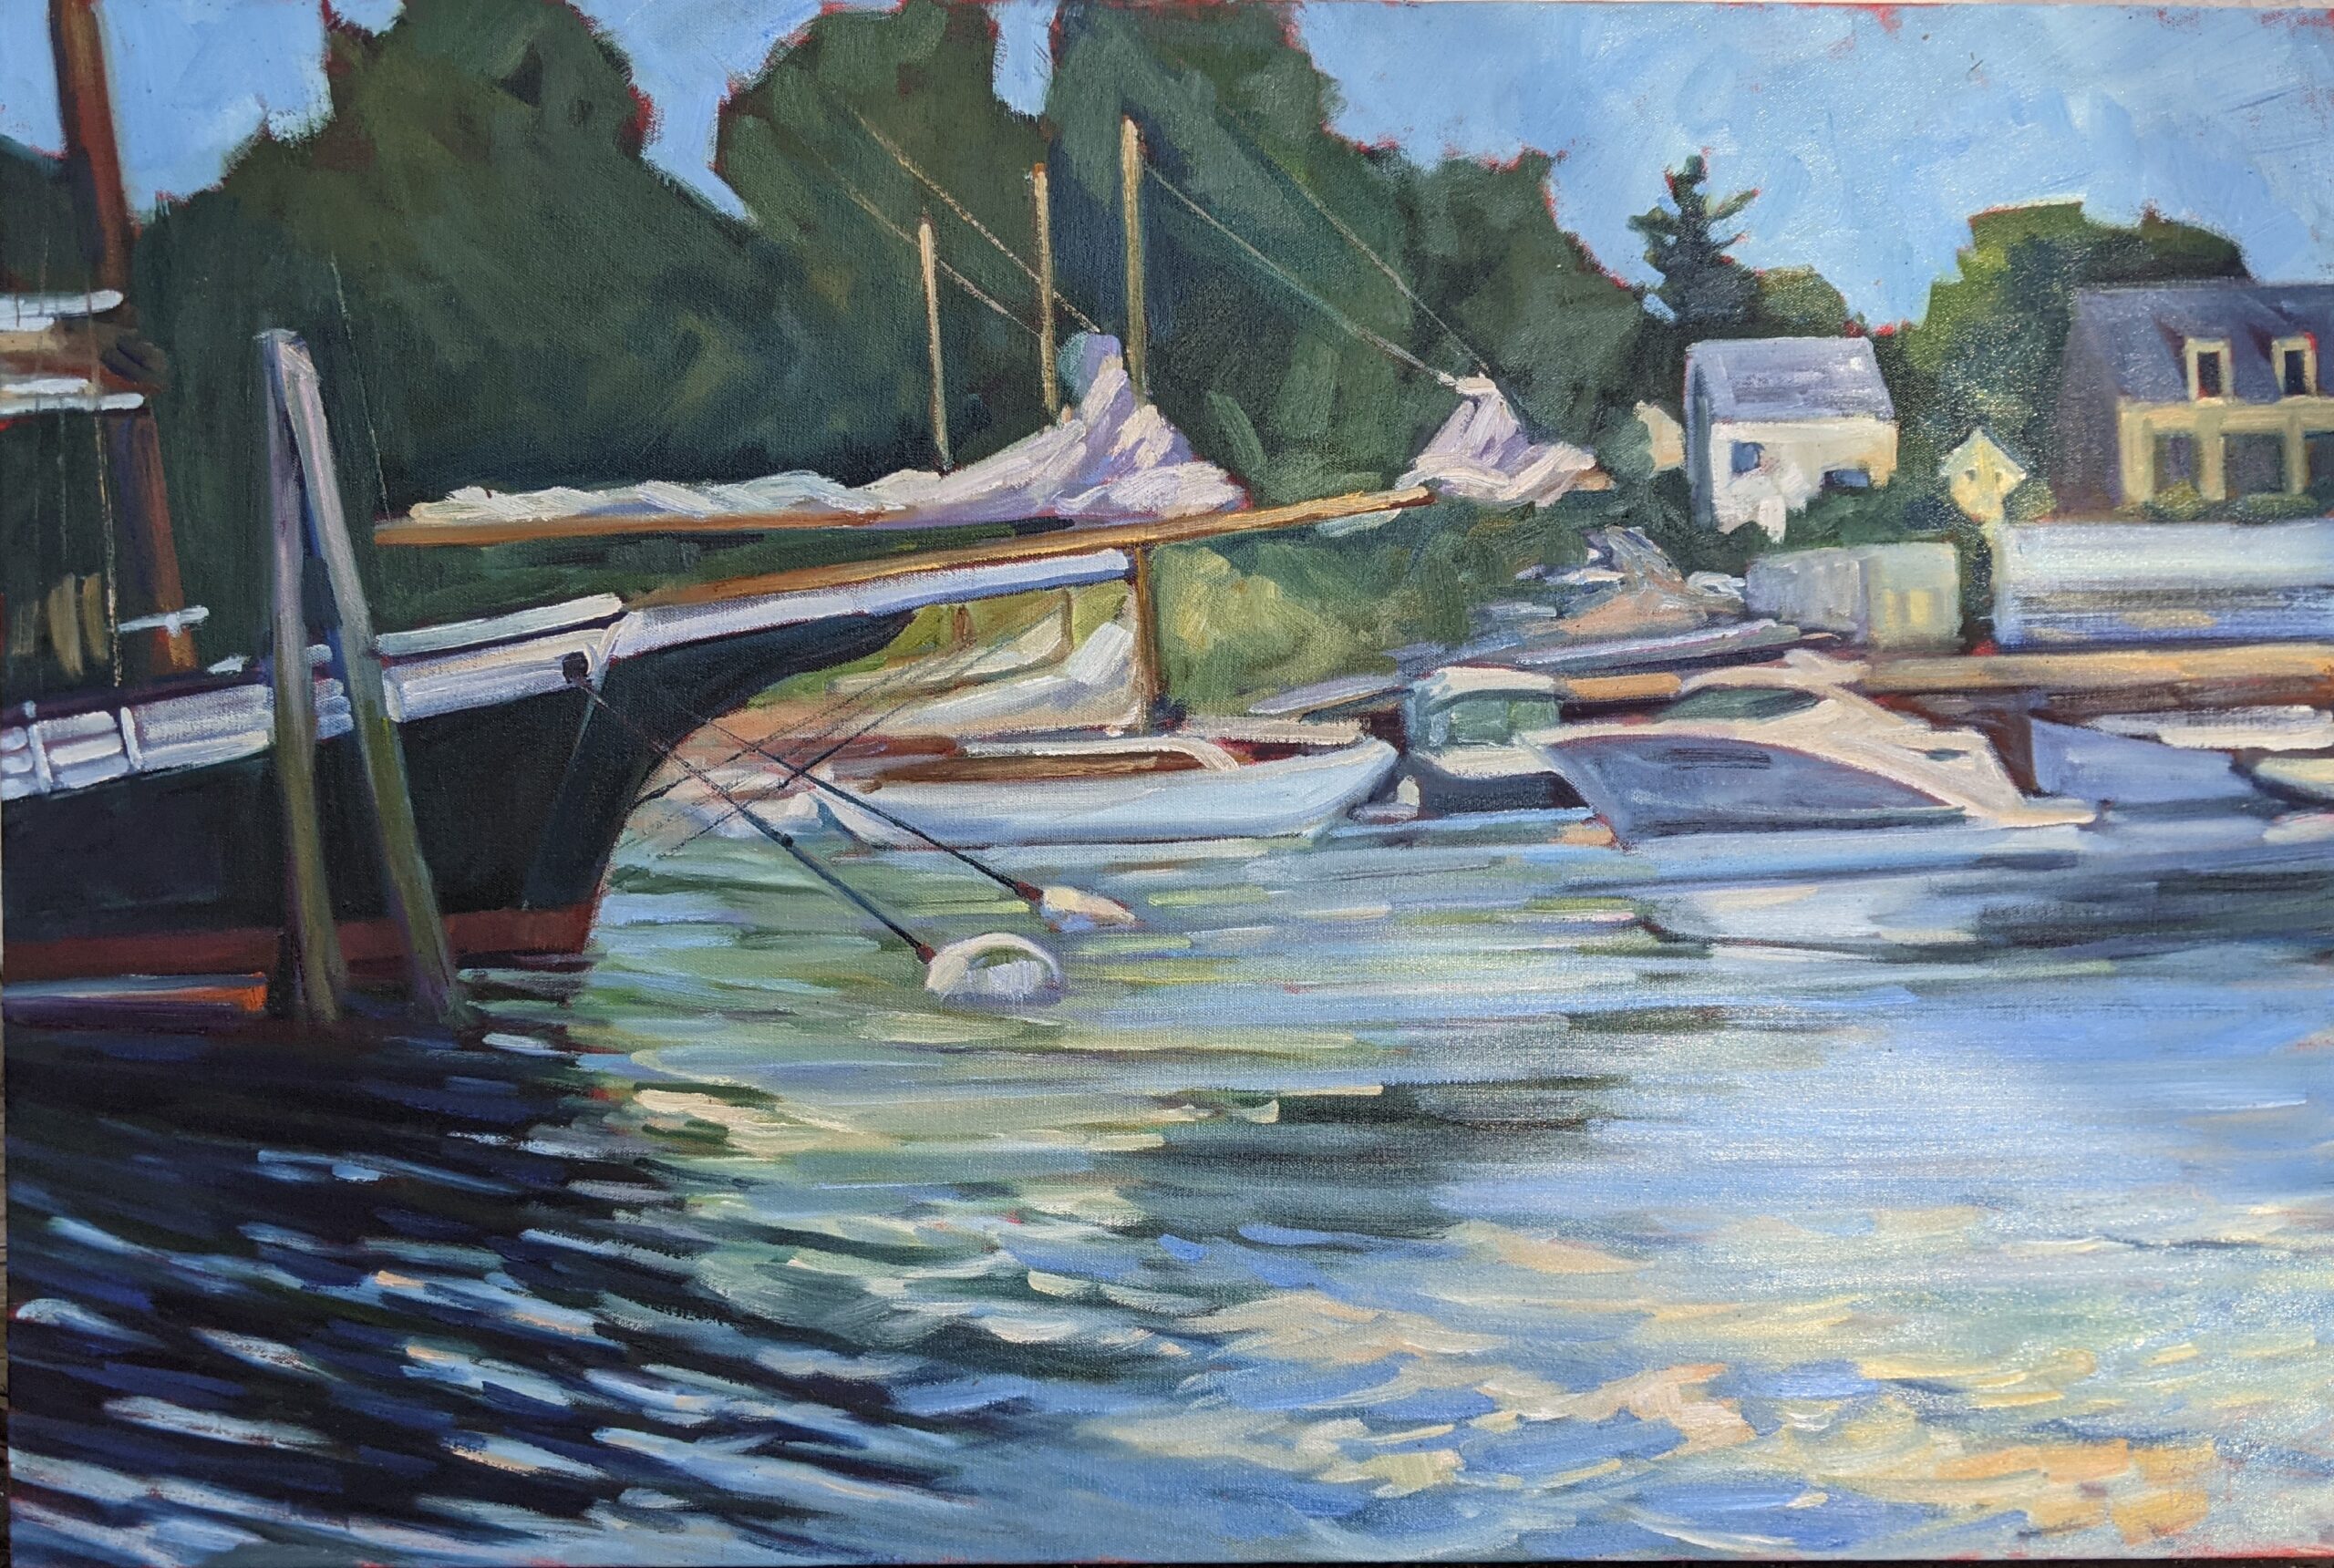 Camden Harbor, Midsummer, oil on canvas, 24X36 $3188 includes shipping in continental US.